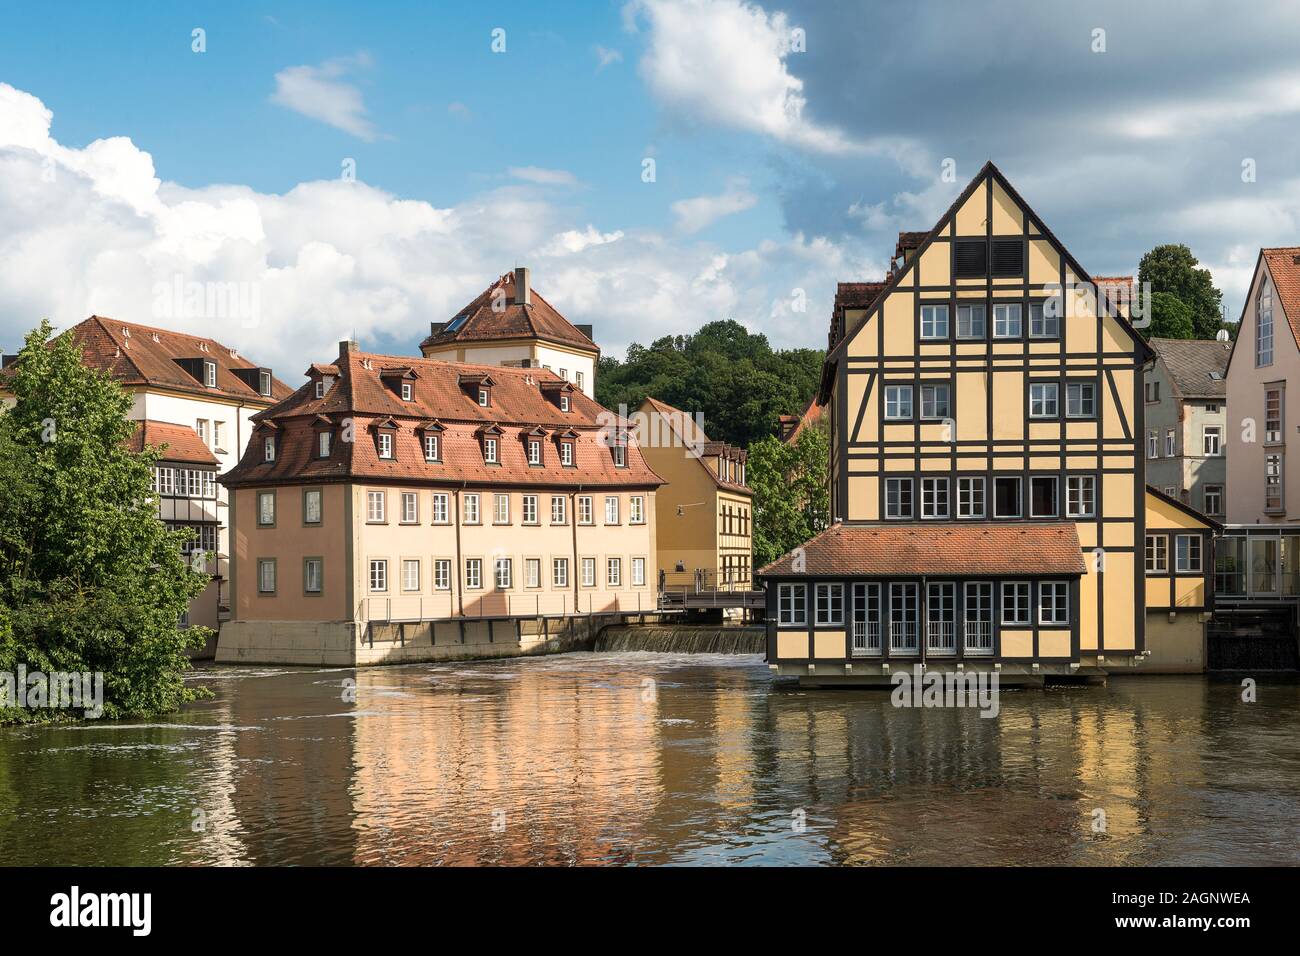 Bamberg, Germany - July 14, 2019; Two old half timbered houses in the center of the city of Bamberg, Germany Stock Photo